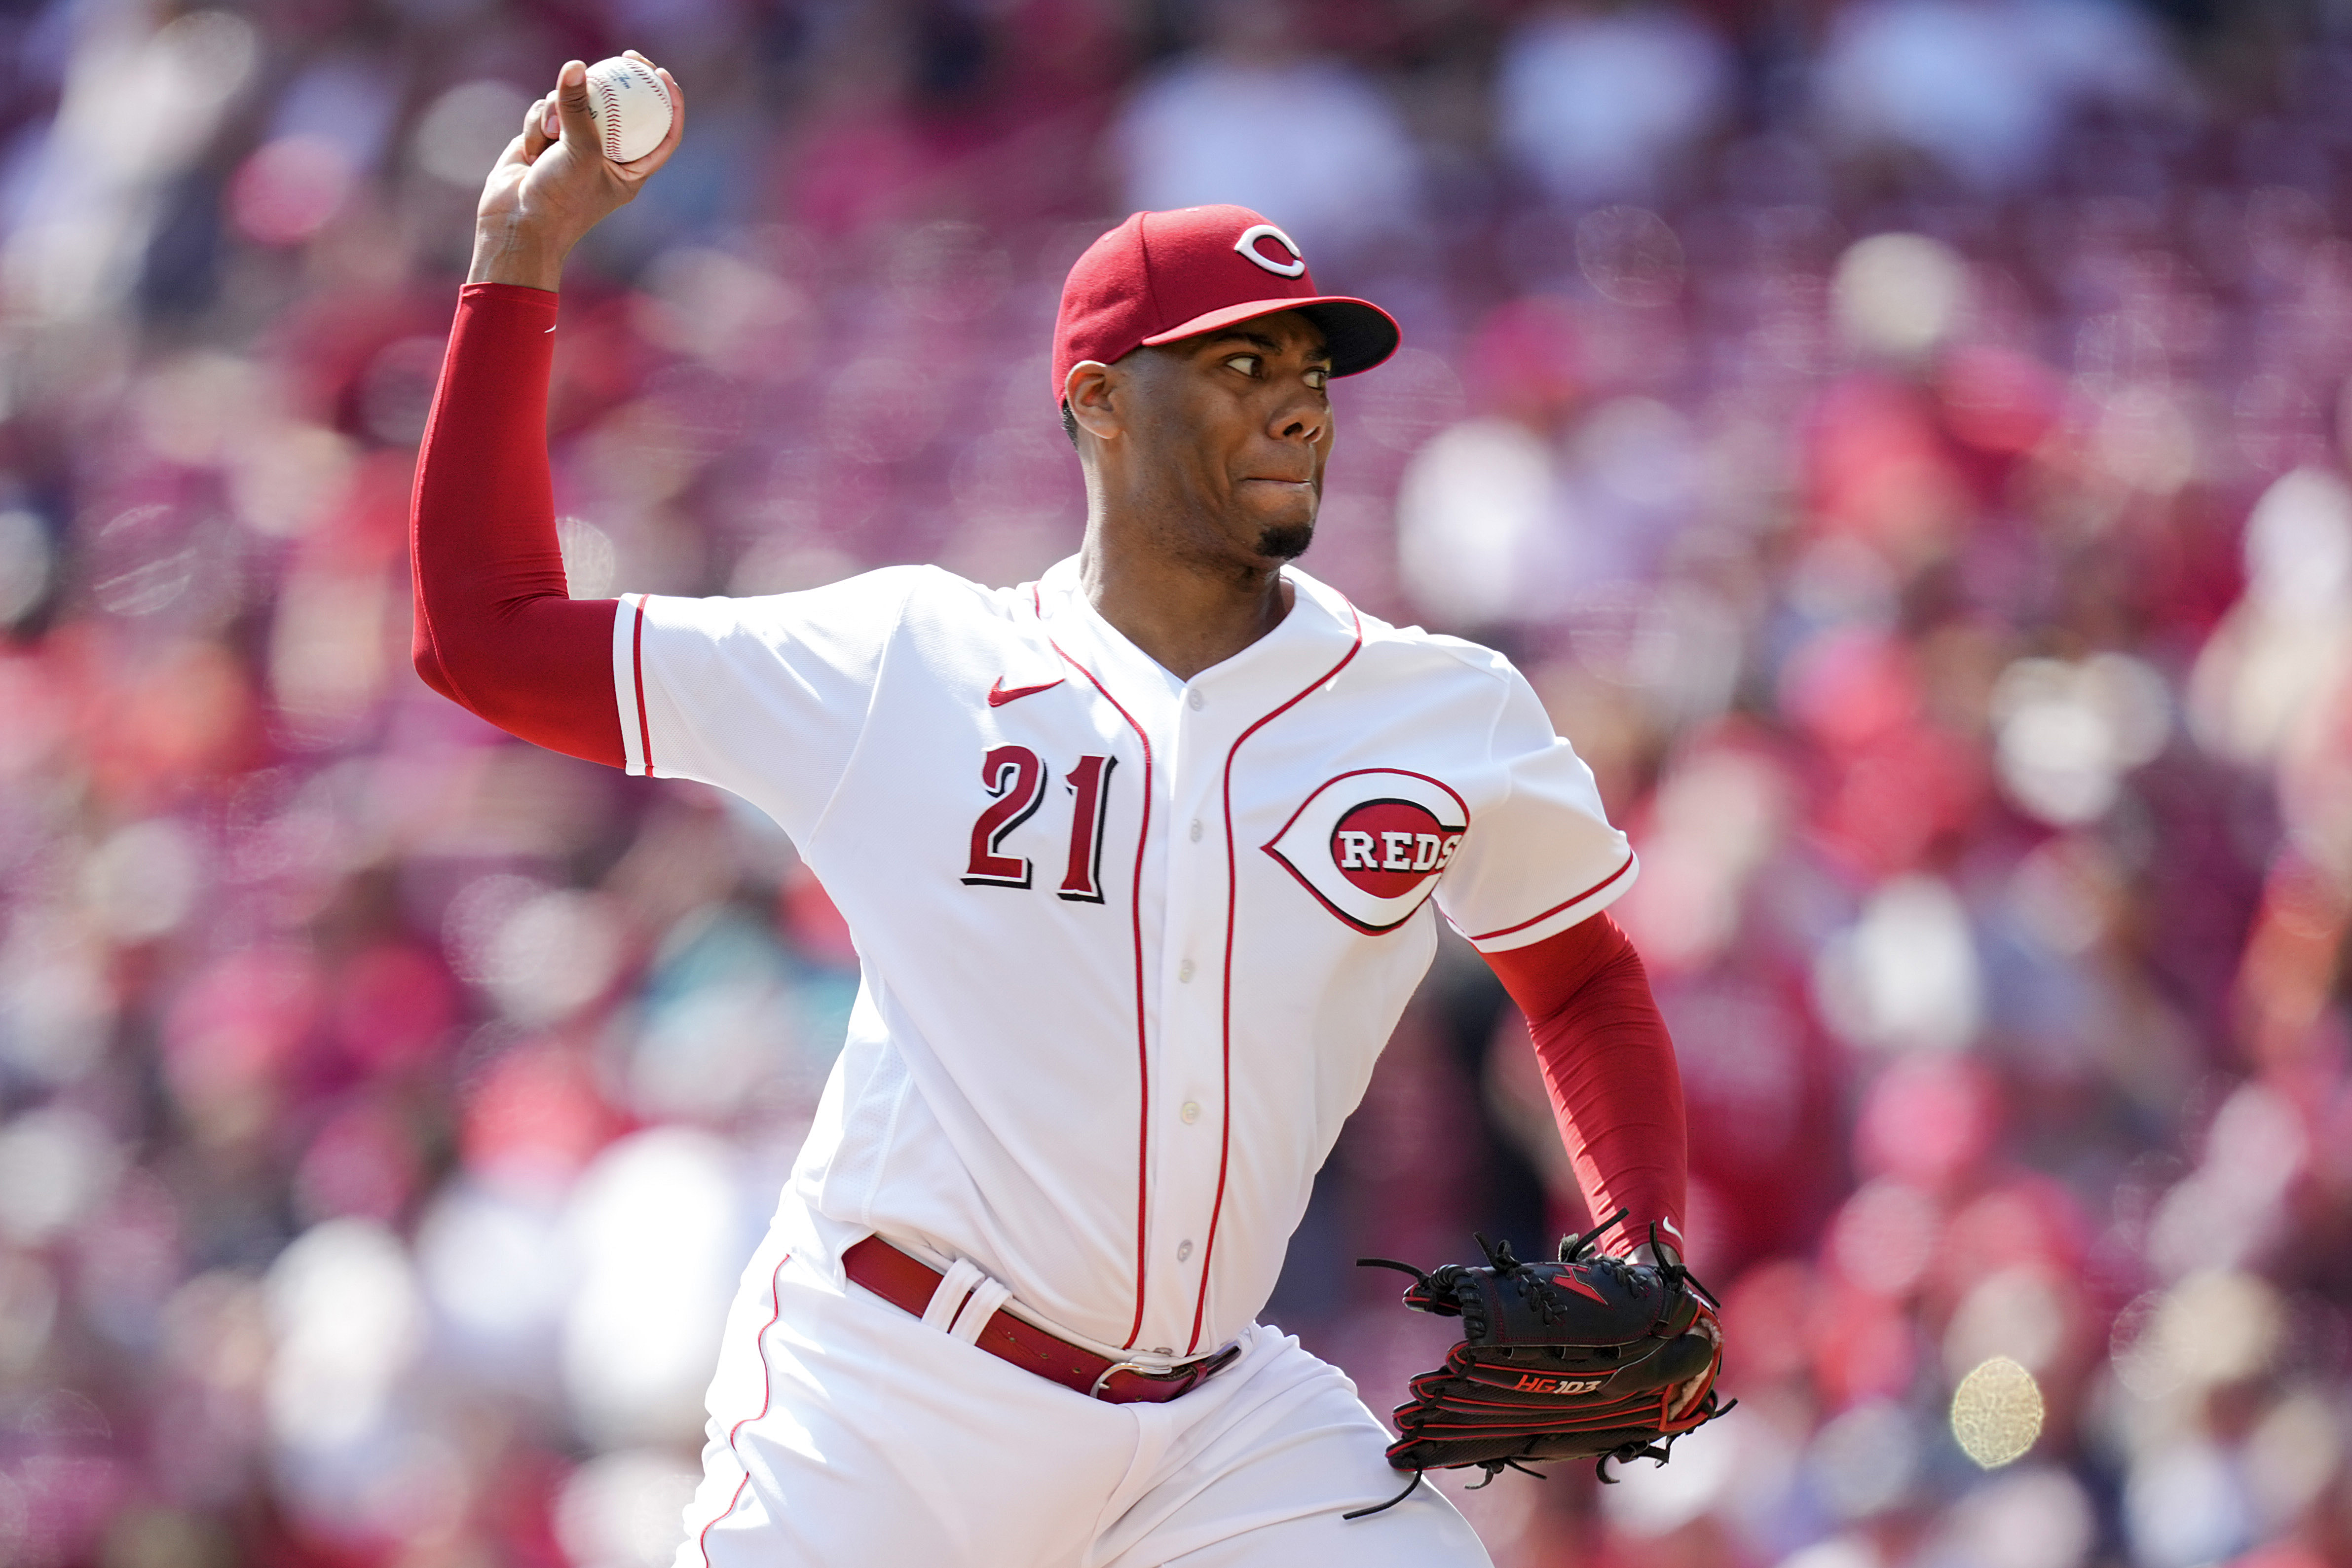 Is it time for the Reds to change their uniforms? Experts weigh in